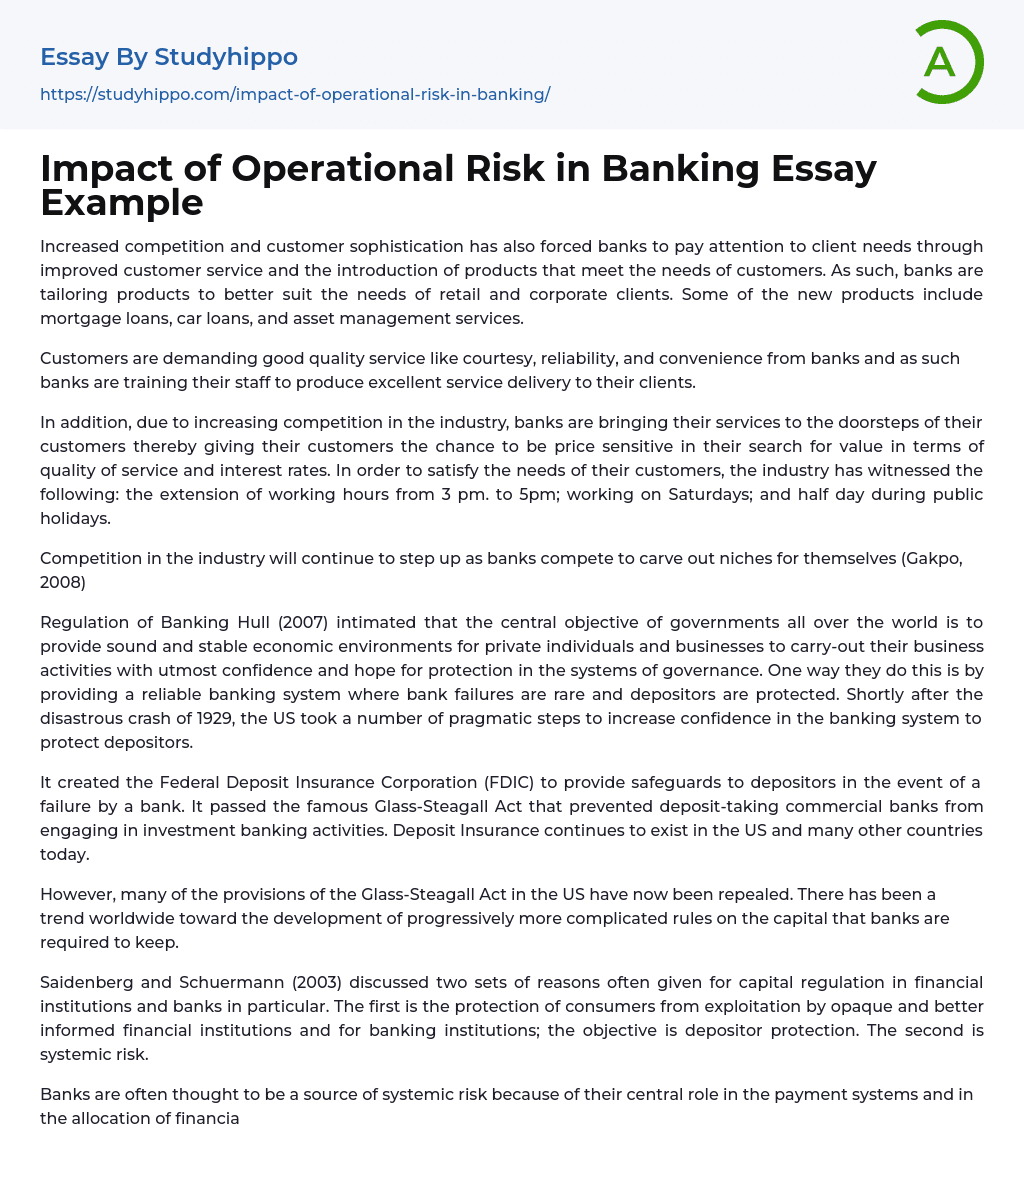 Impact of Operational Risk in Banking Essay Example